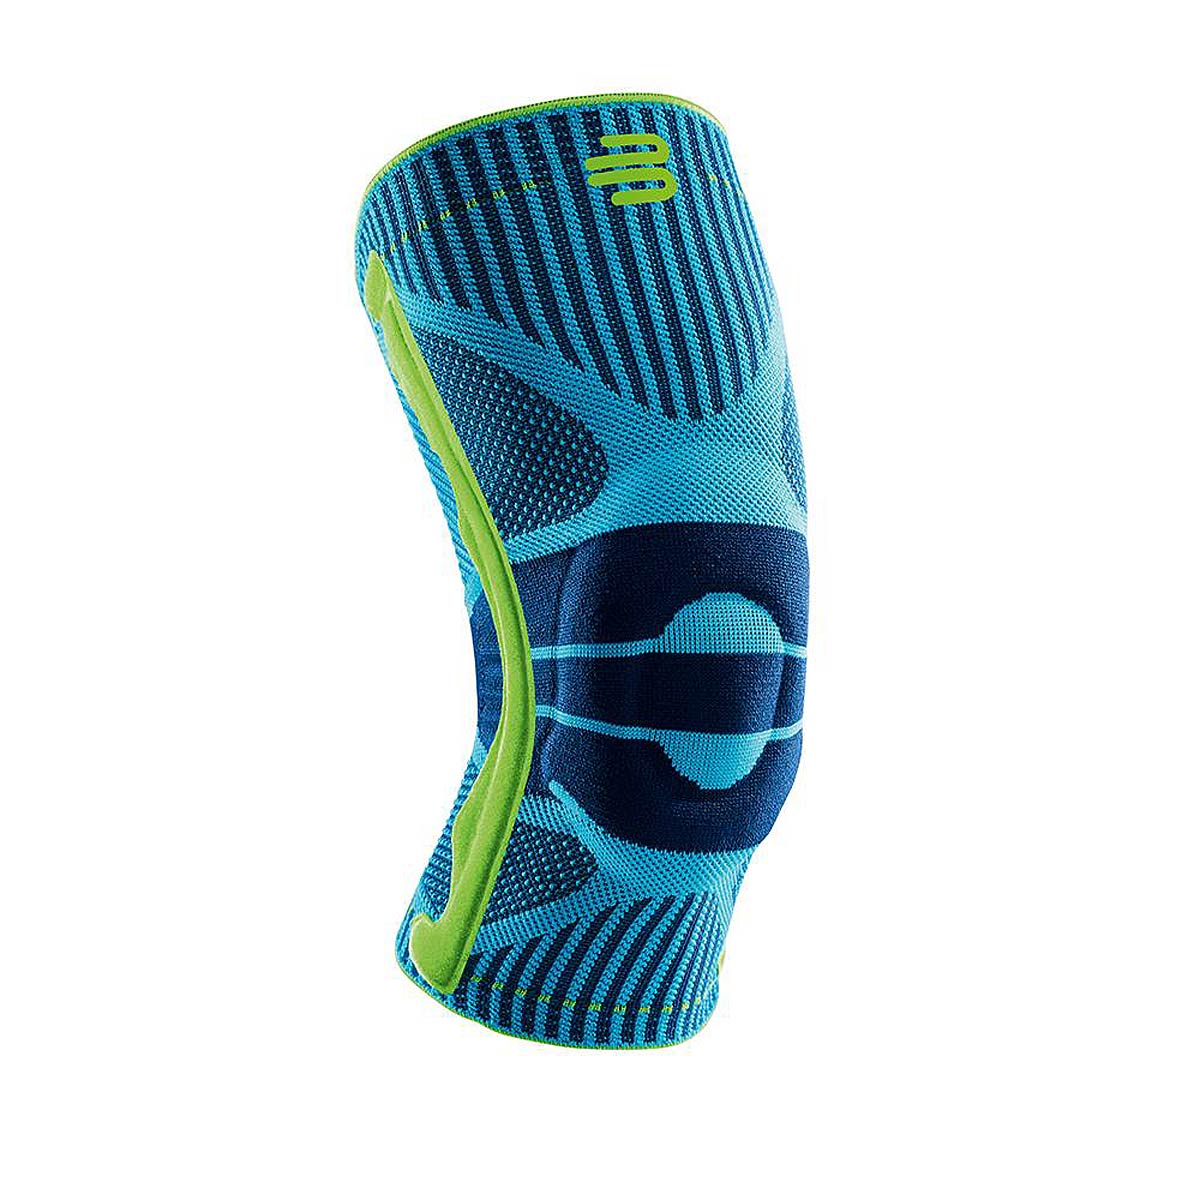 Image of Bauerfeind Sports Knee Support, Green/blue